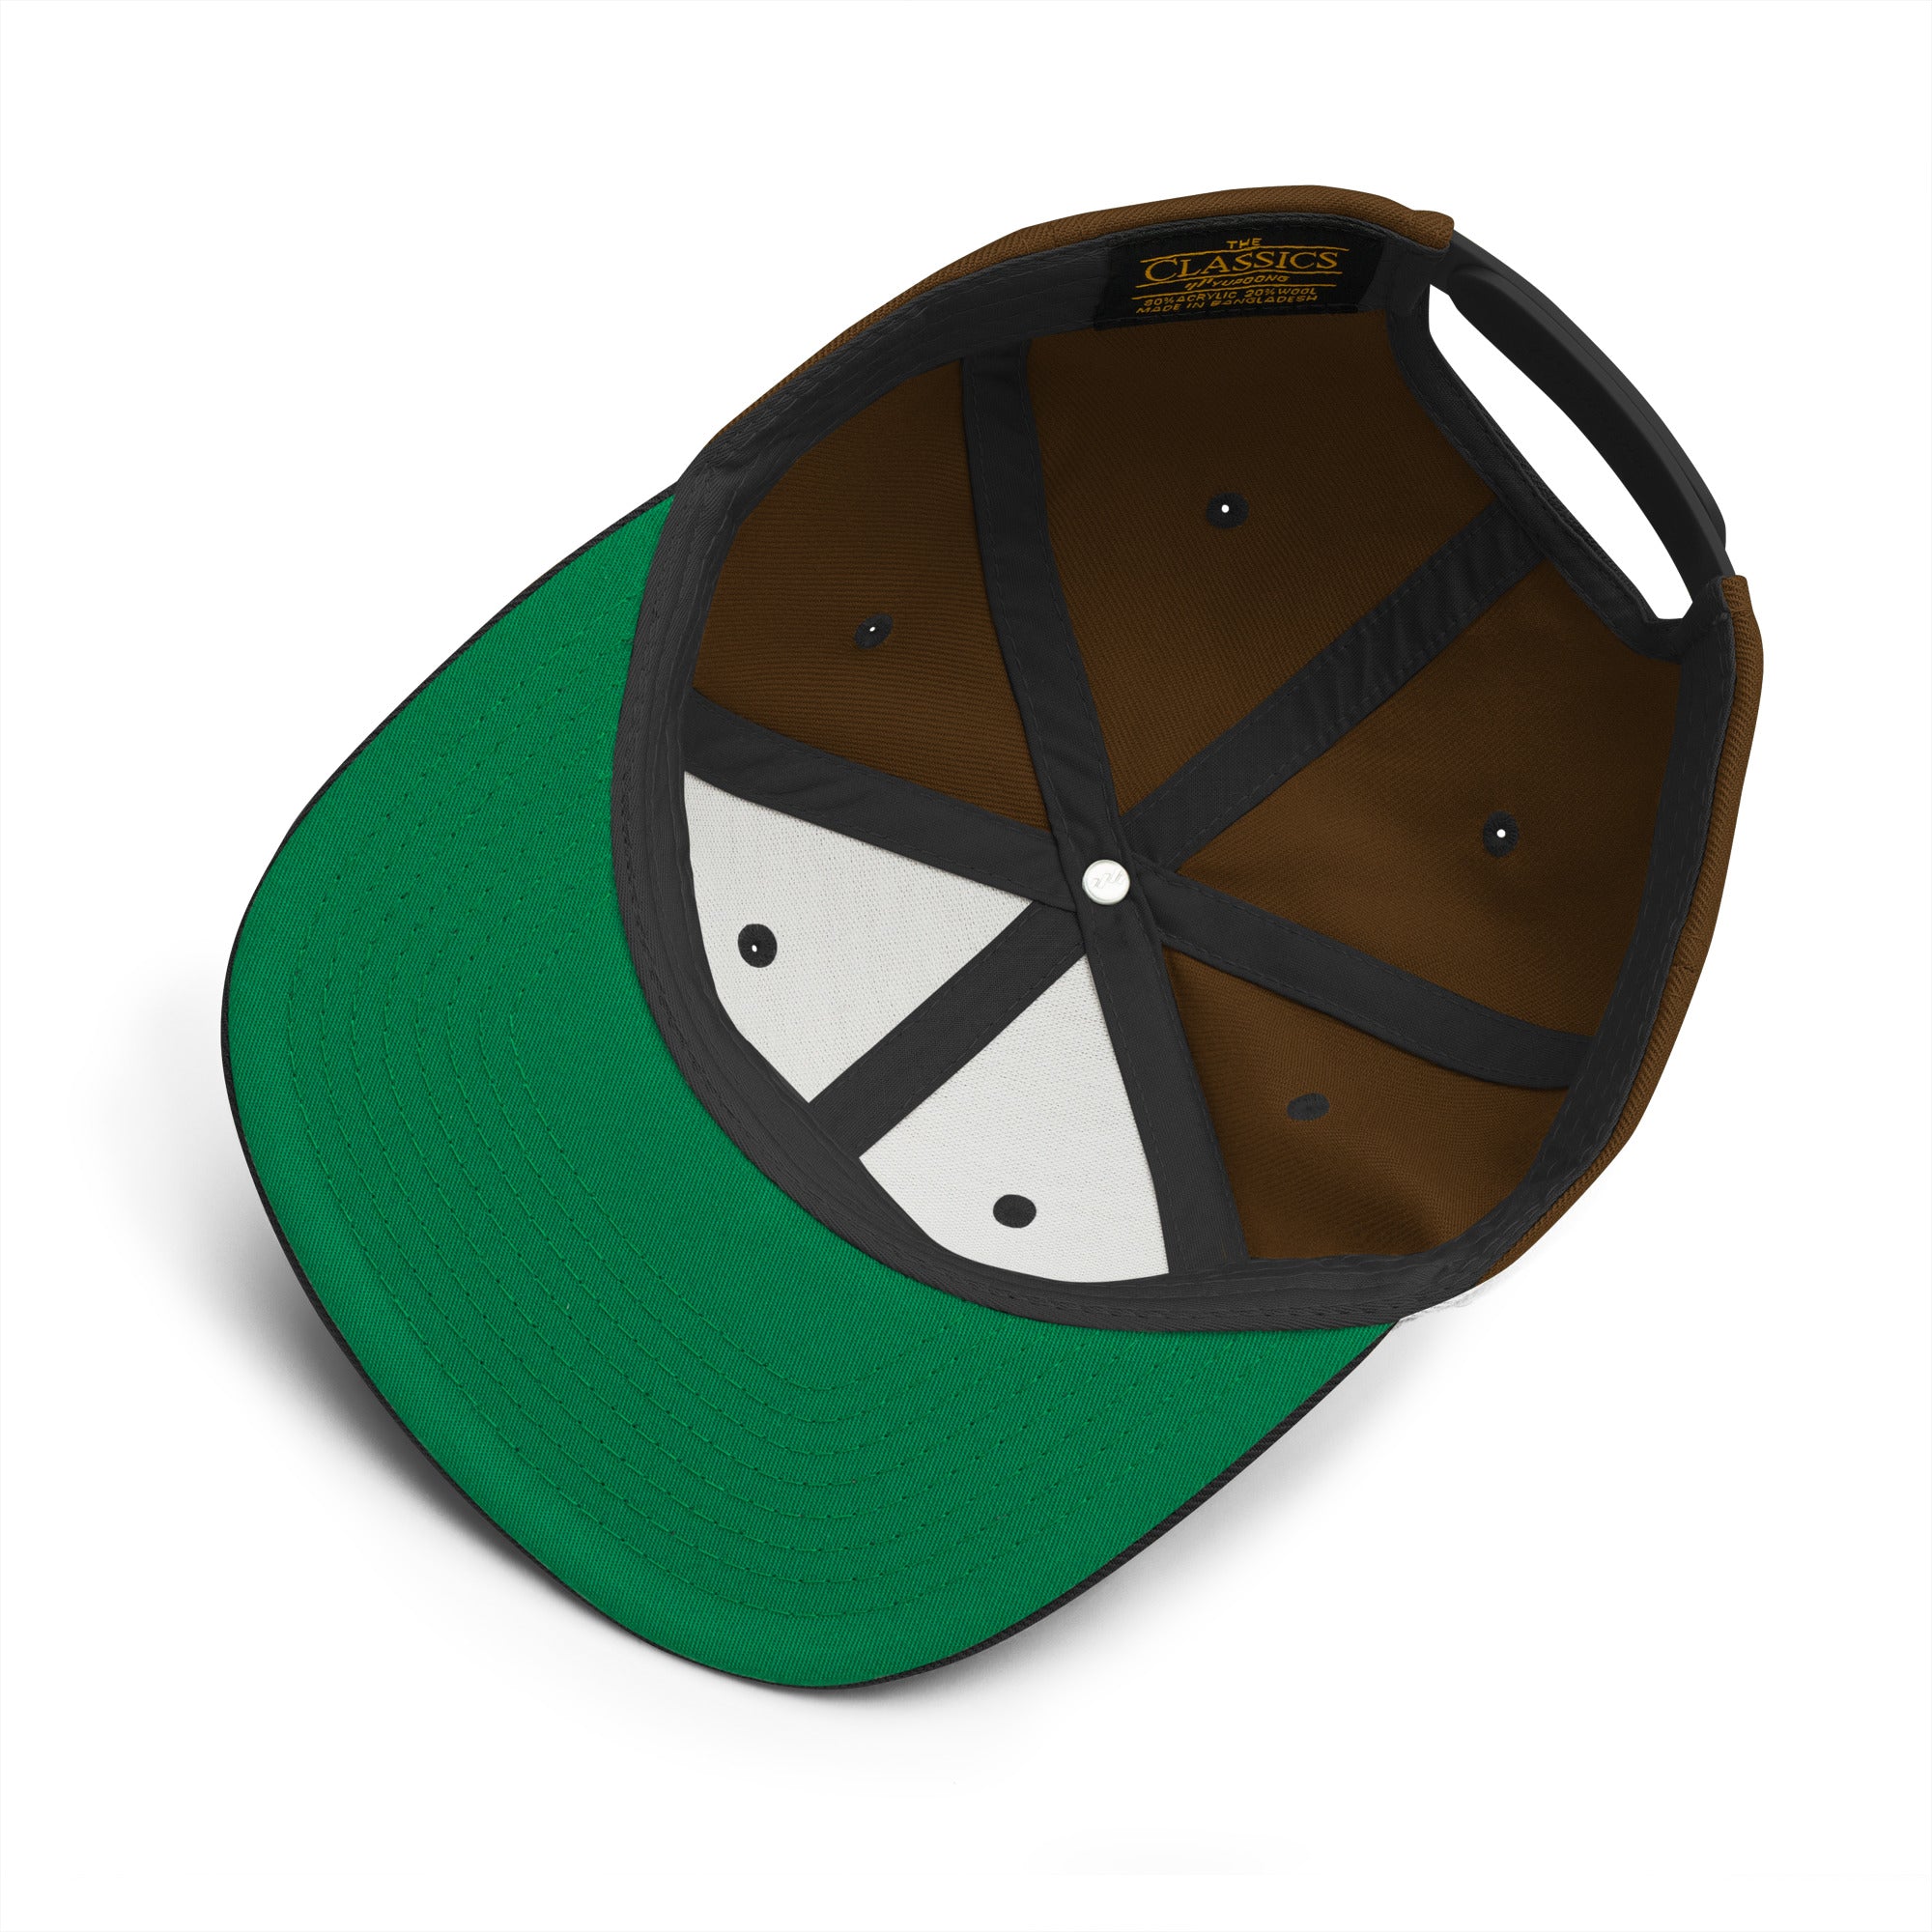 Casquette Snapback camouflage Camperfan green/yellow